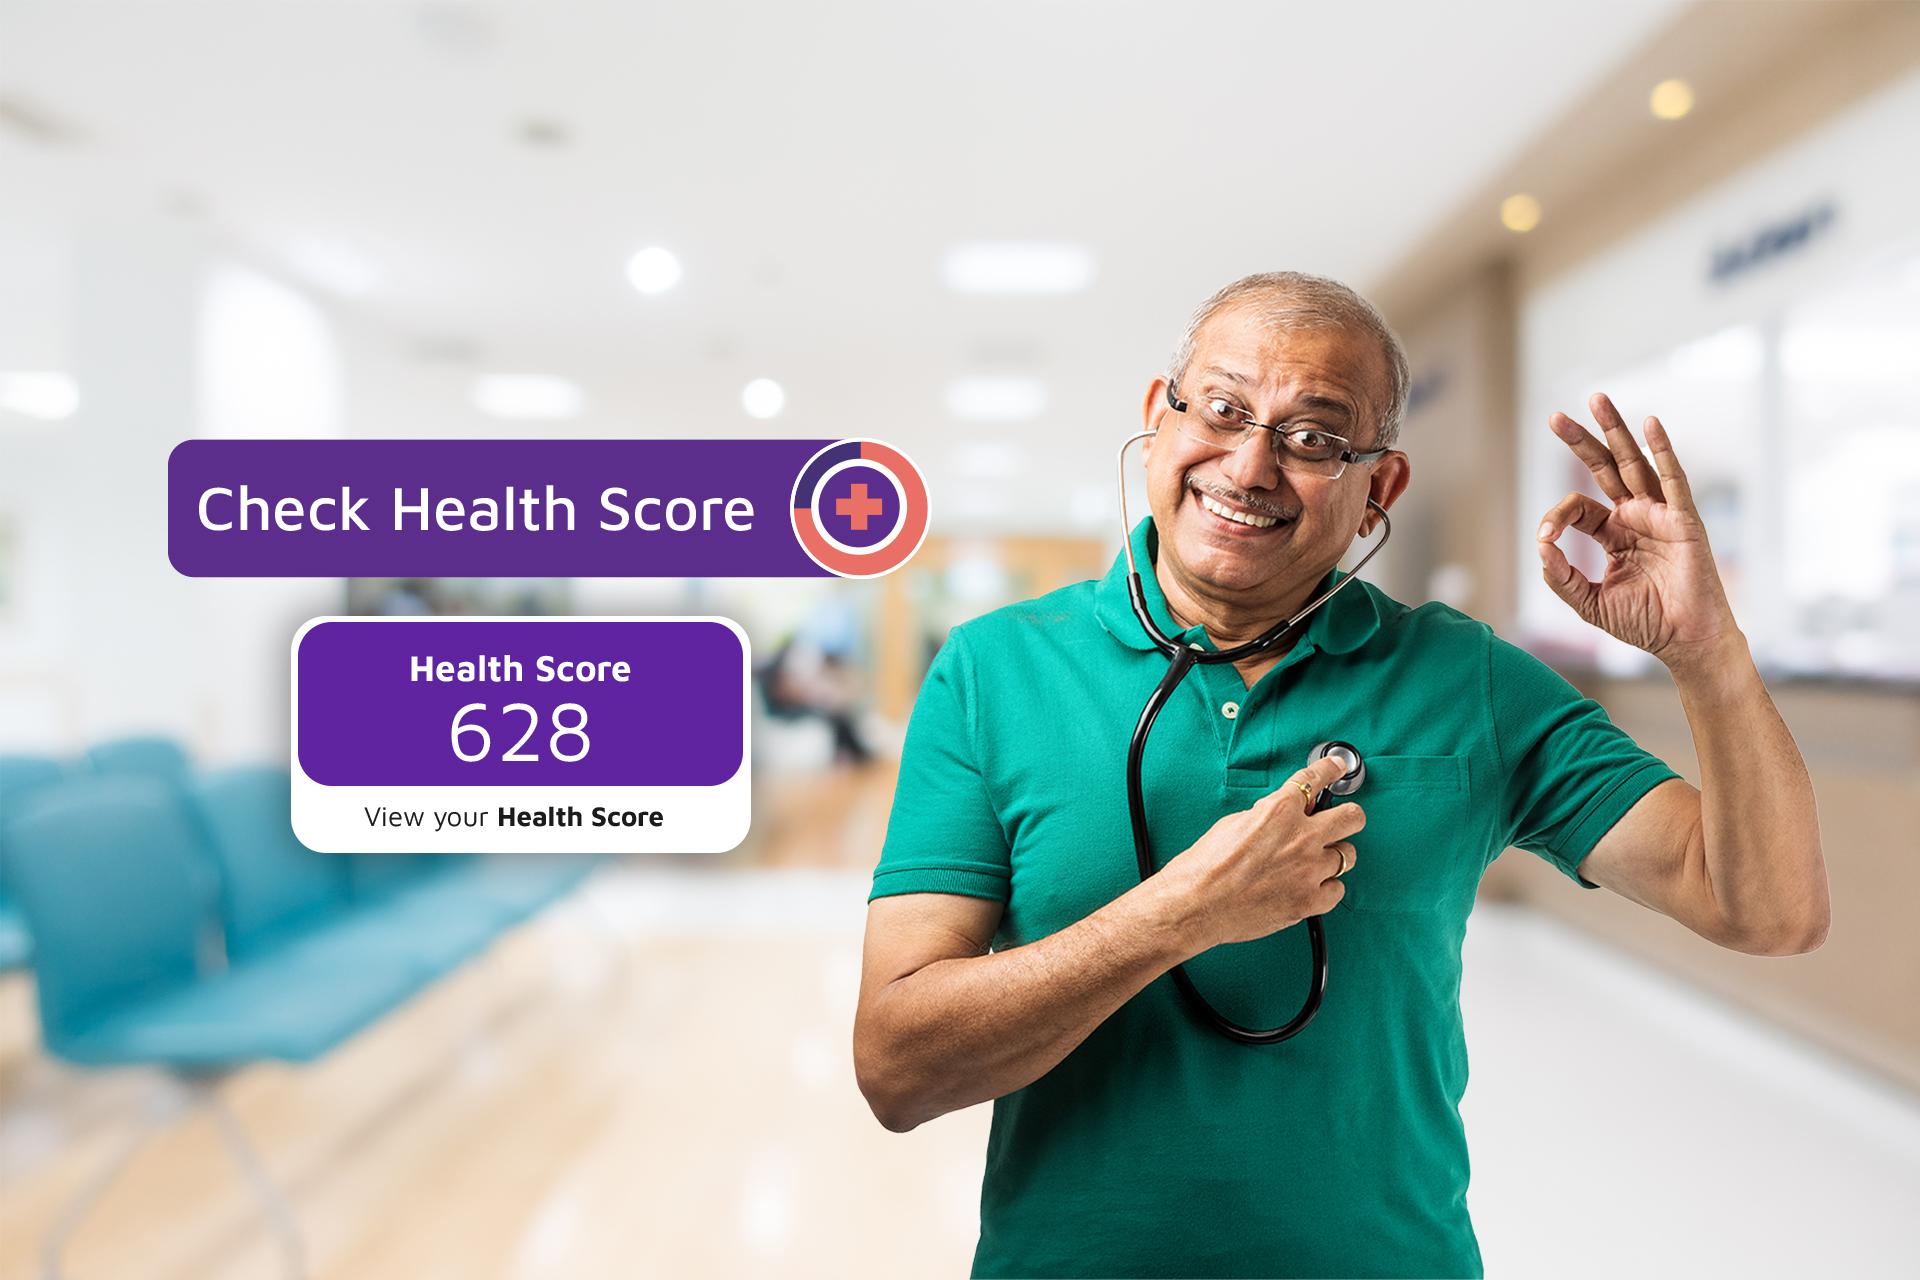 Get your Health Score from Bajaj Finserv Health! Here's Why it’s Important